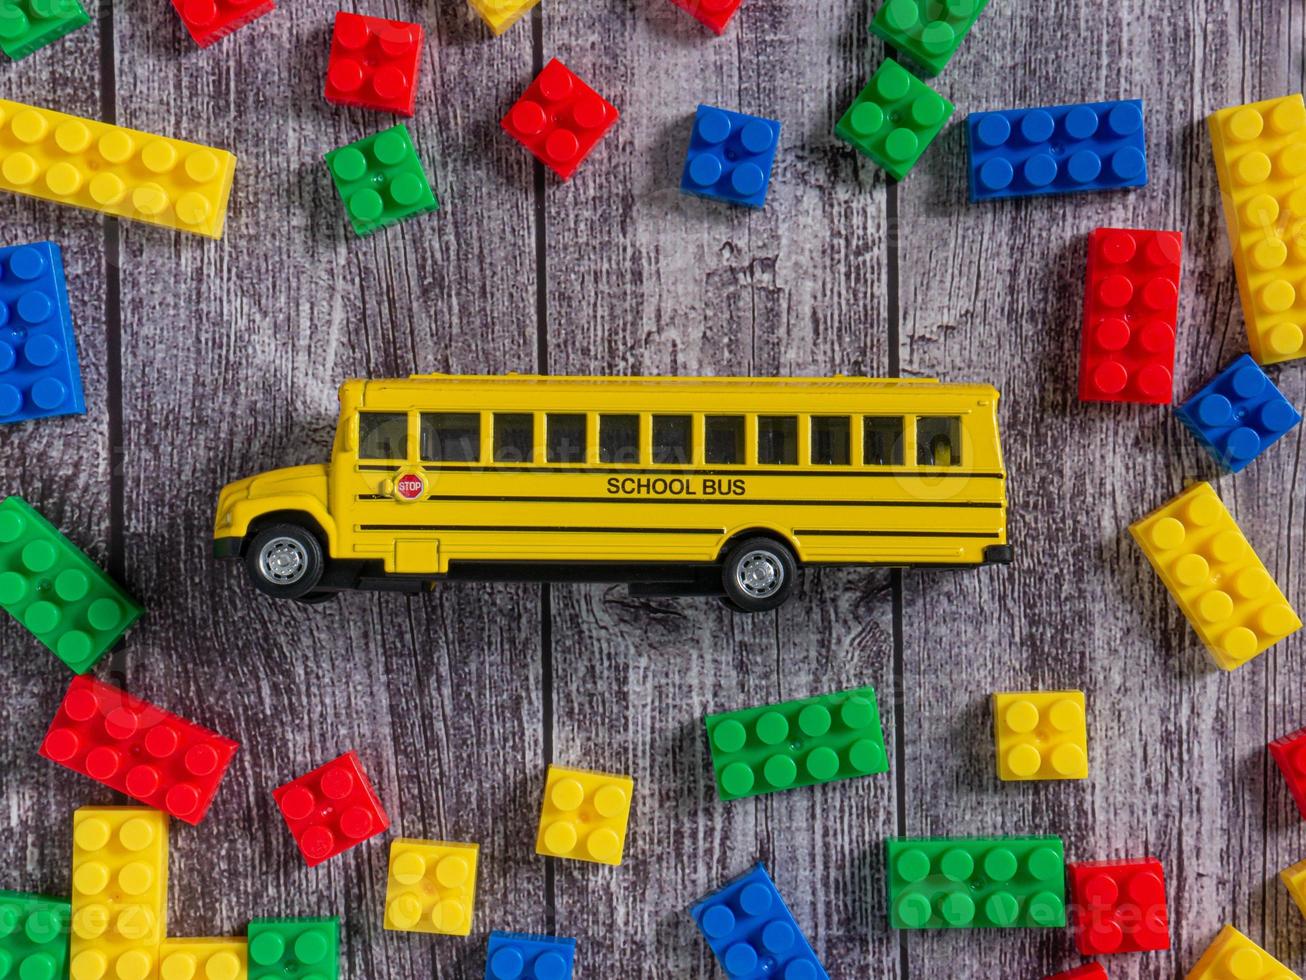 box plastic puzzle multicolour and school bus  for kid or education concept photo